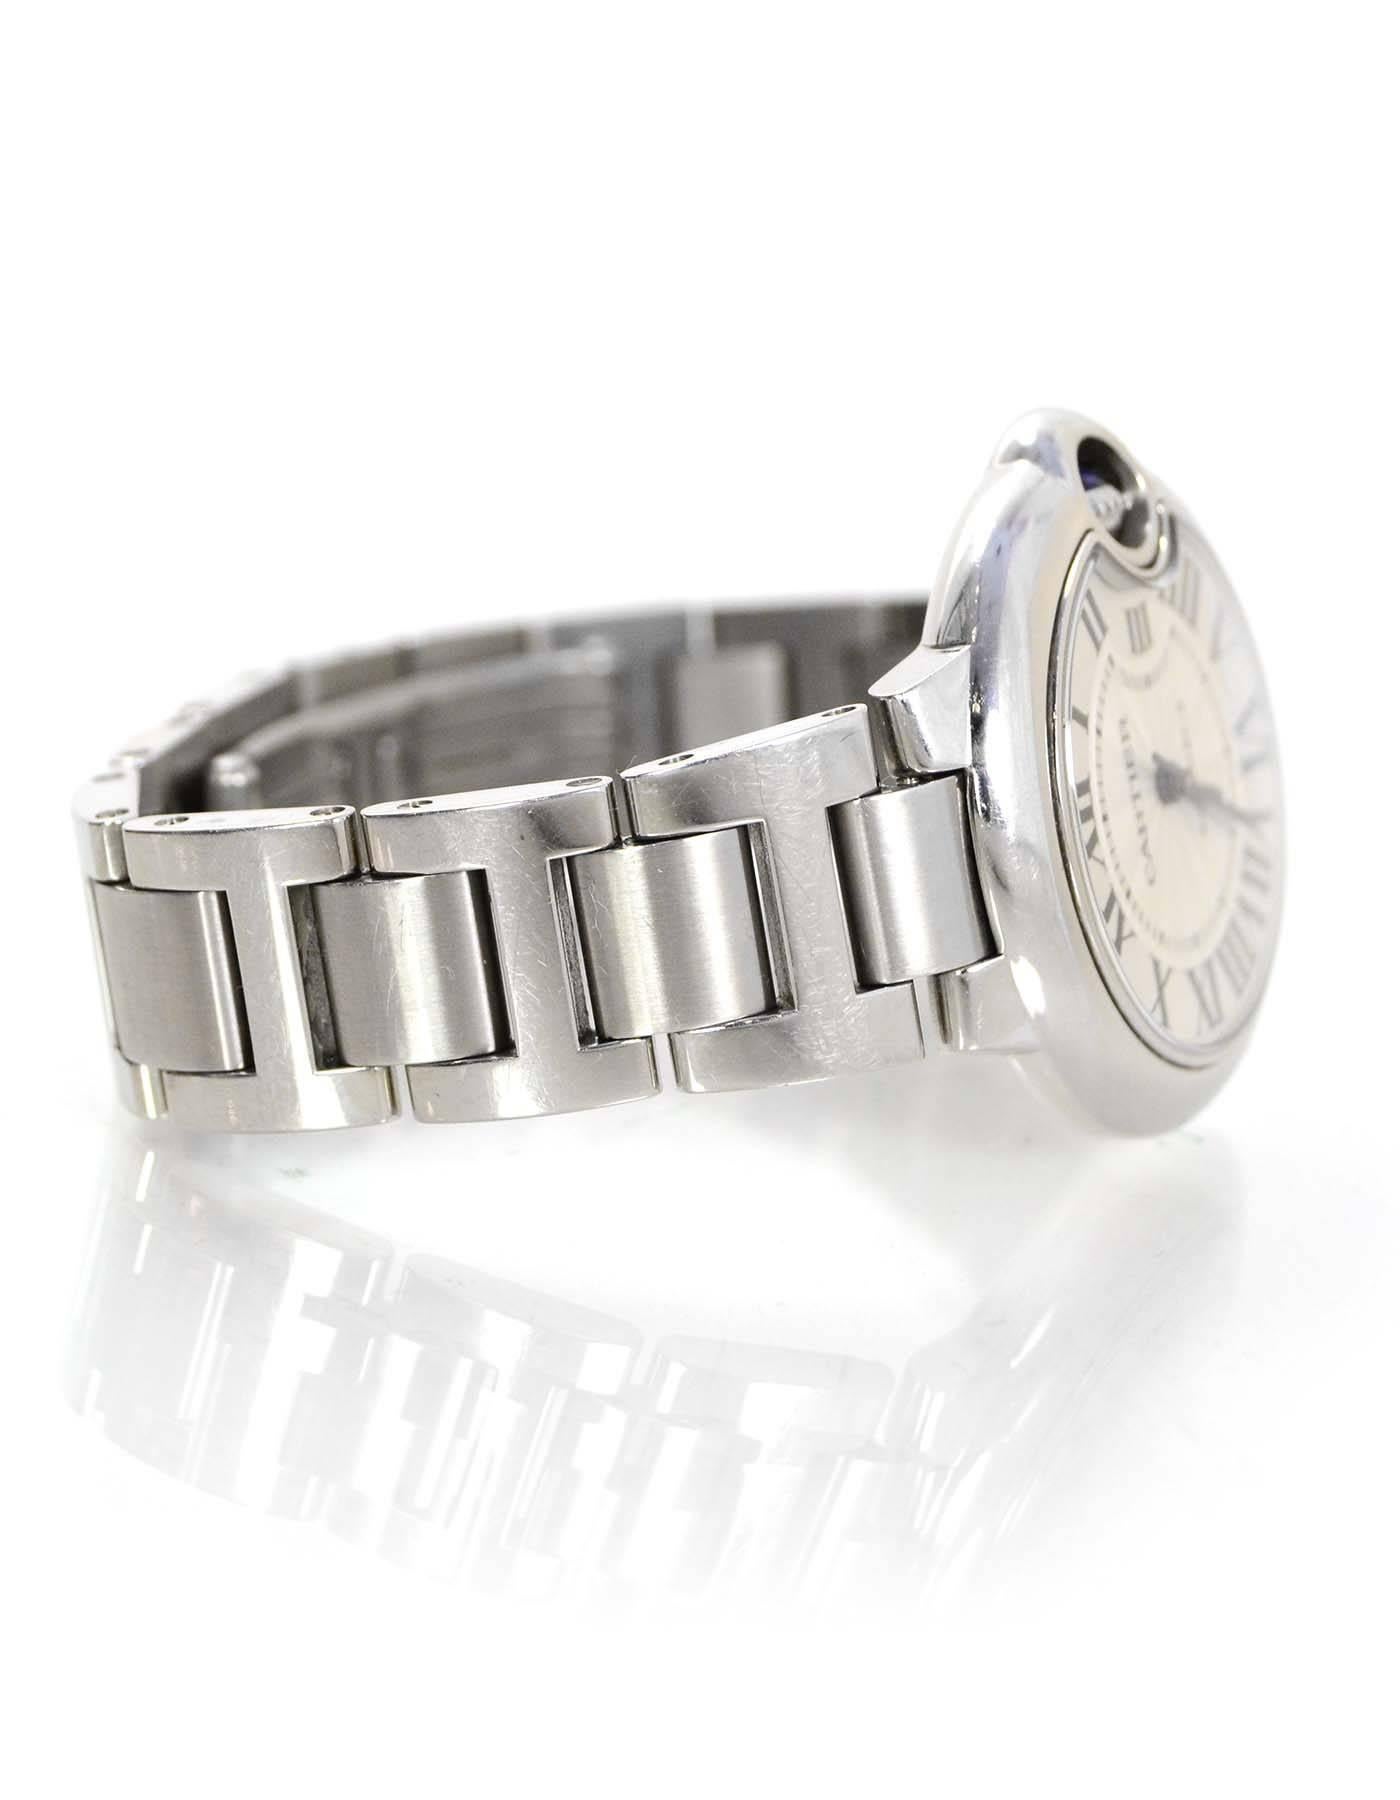 Cartier Stainless Steel 33mm Ballon  Bleu De Cartier Watch 

Made In: Switzerland
Color: Silver
Materials: Stainless steel
Movement: Automatic
Closure/Opening: Double hinge watch closure
Serial Number: 110861UX
Retail Price: $5,750 + tax
Overall